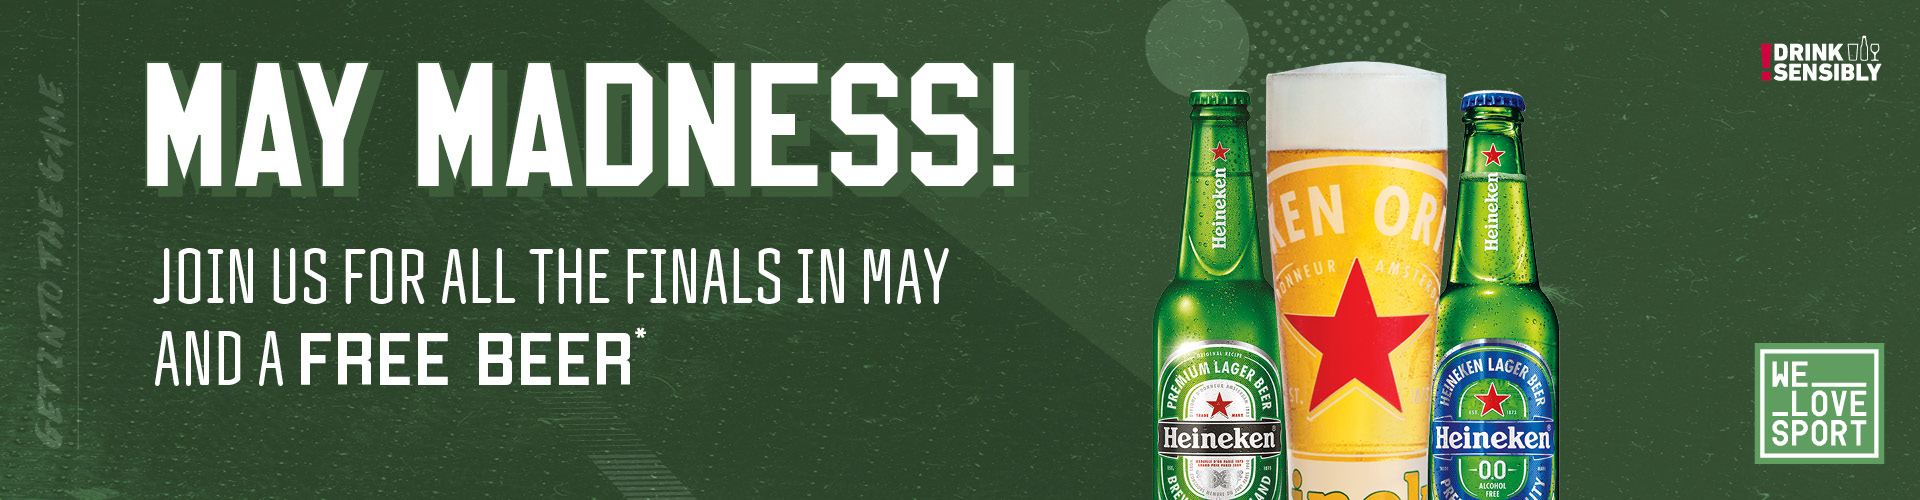 May Madness! Join us for all the finals in May and a free beer*